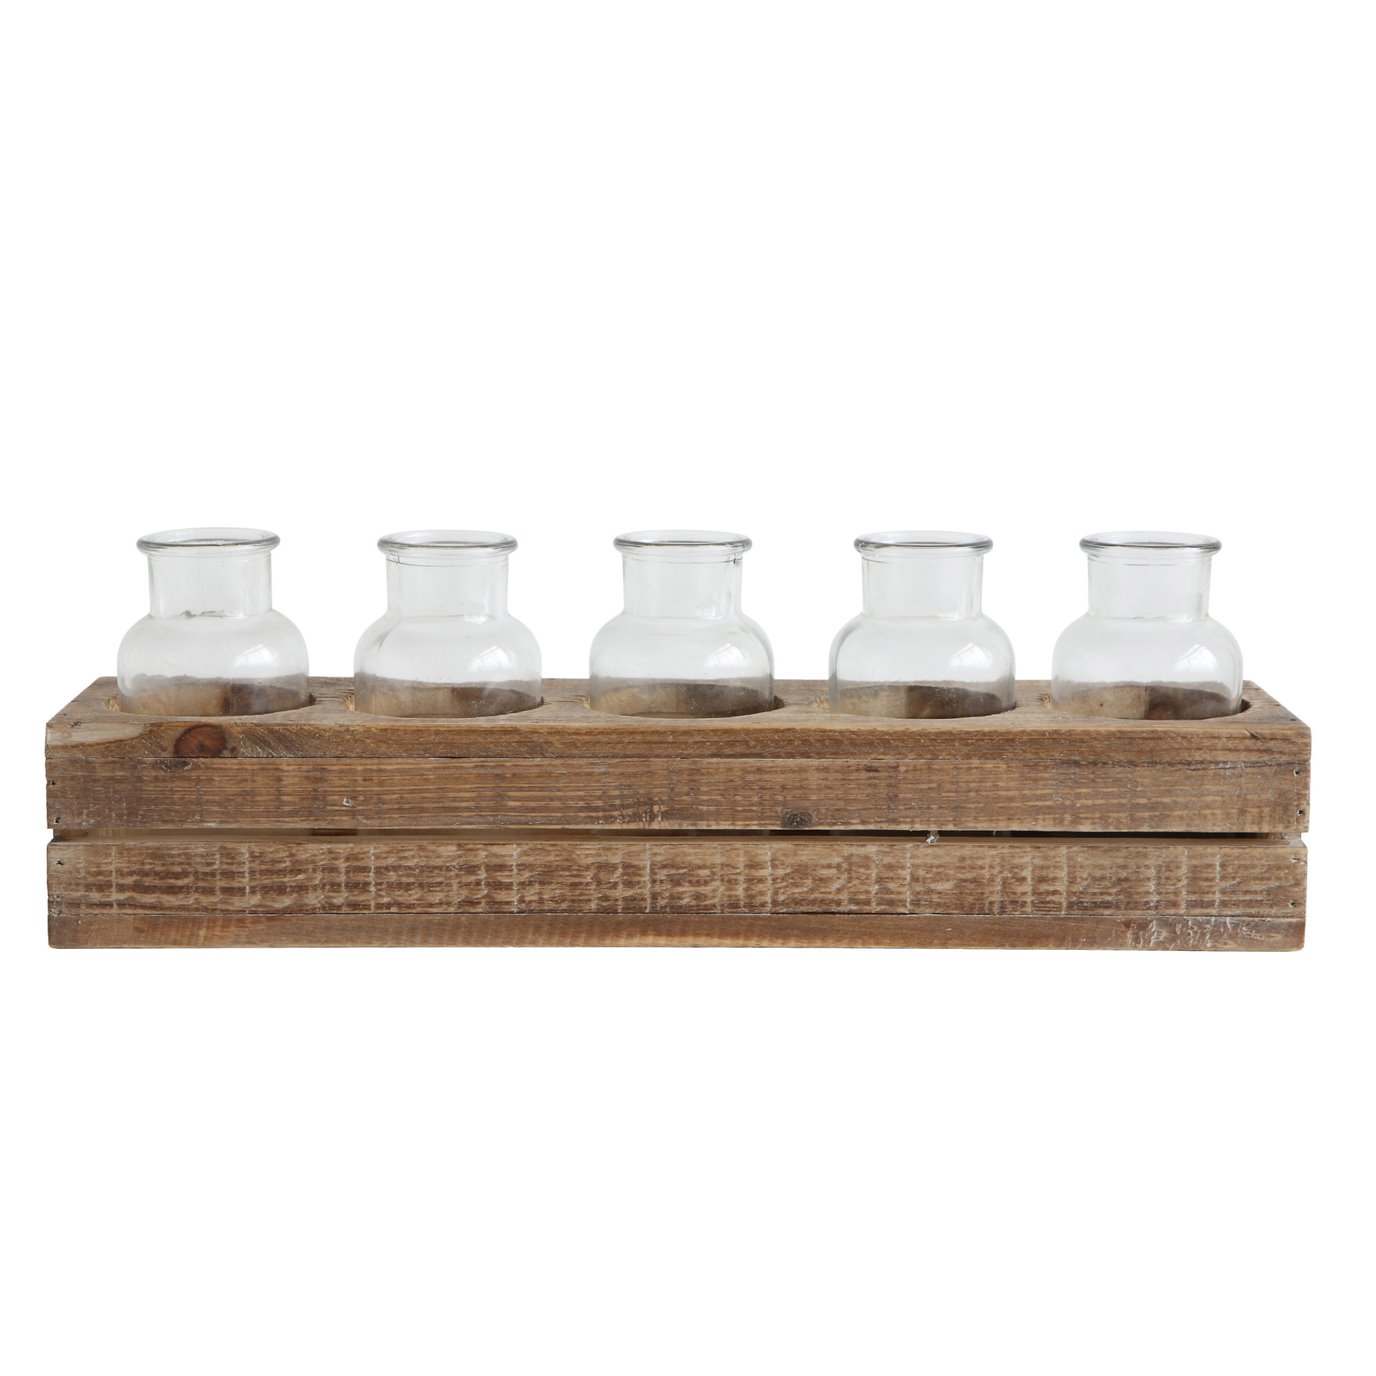 Wood Crate With 5 Glass Bottles (Set of 6 Pieces)